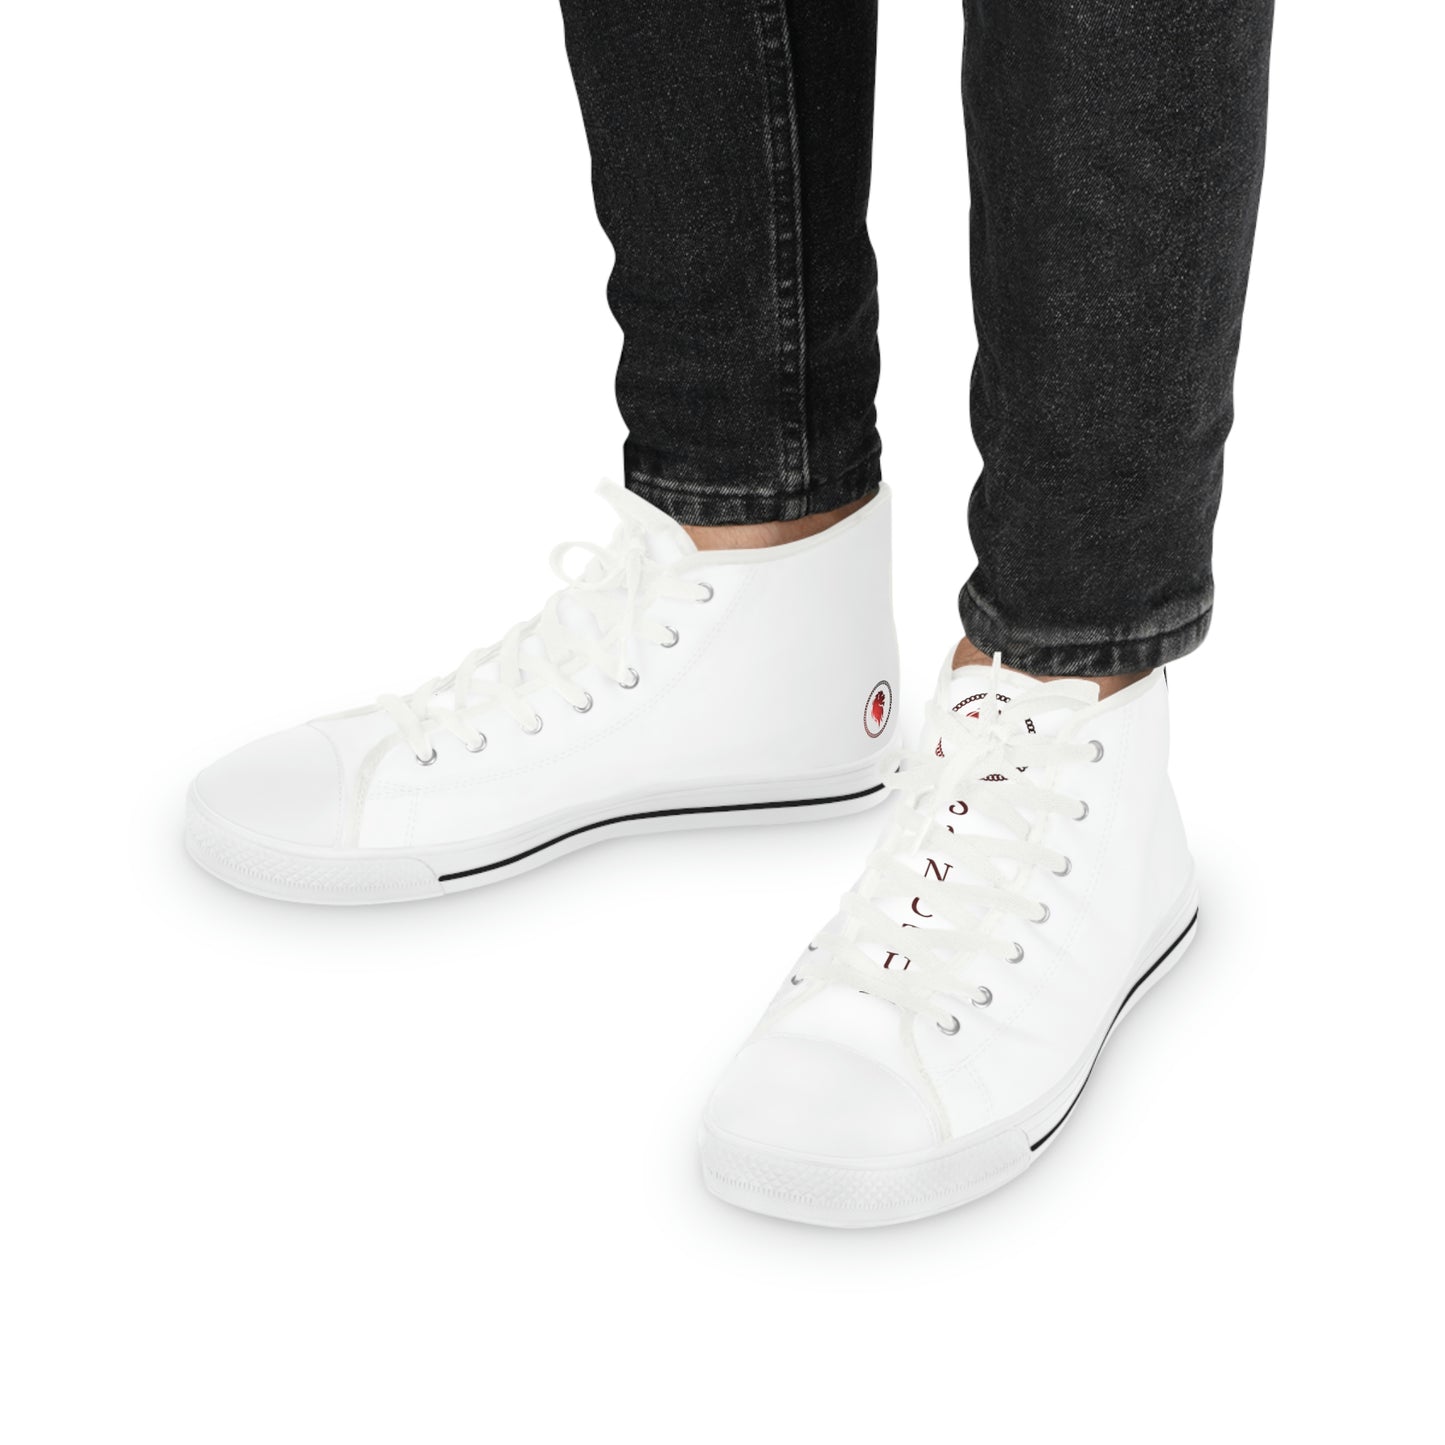 Red/White High Top Sneakers